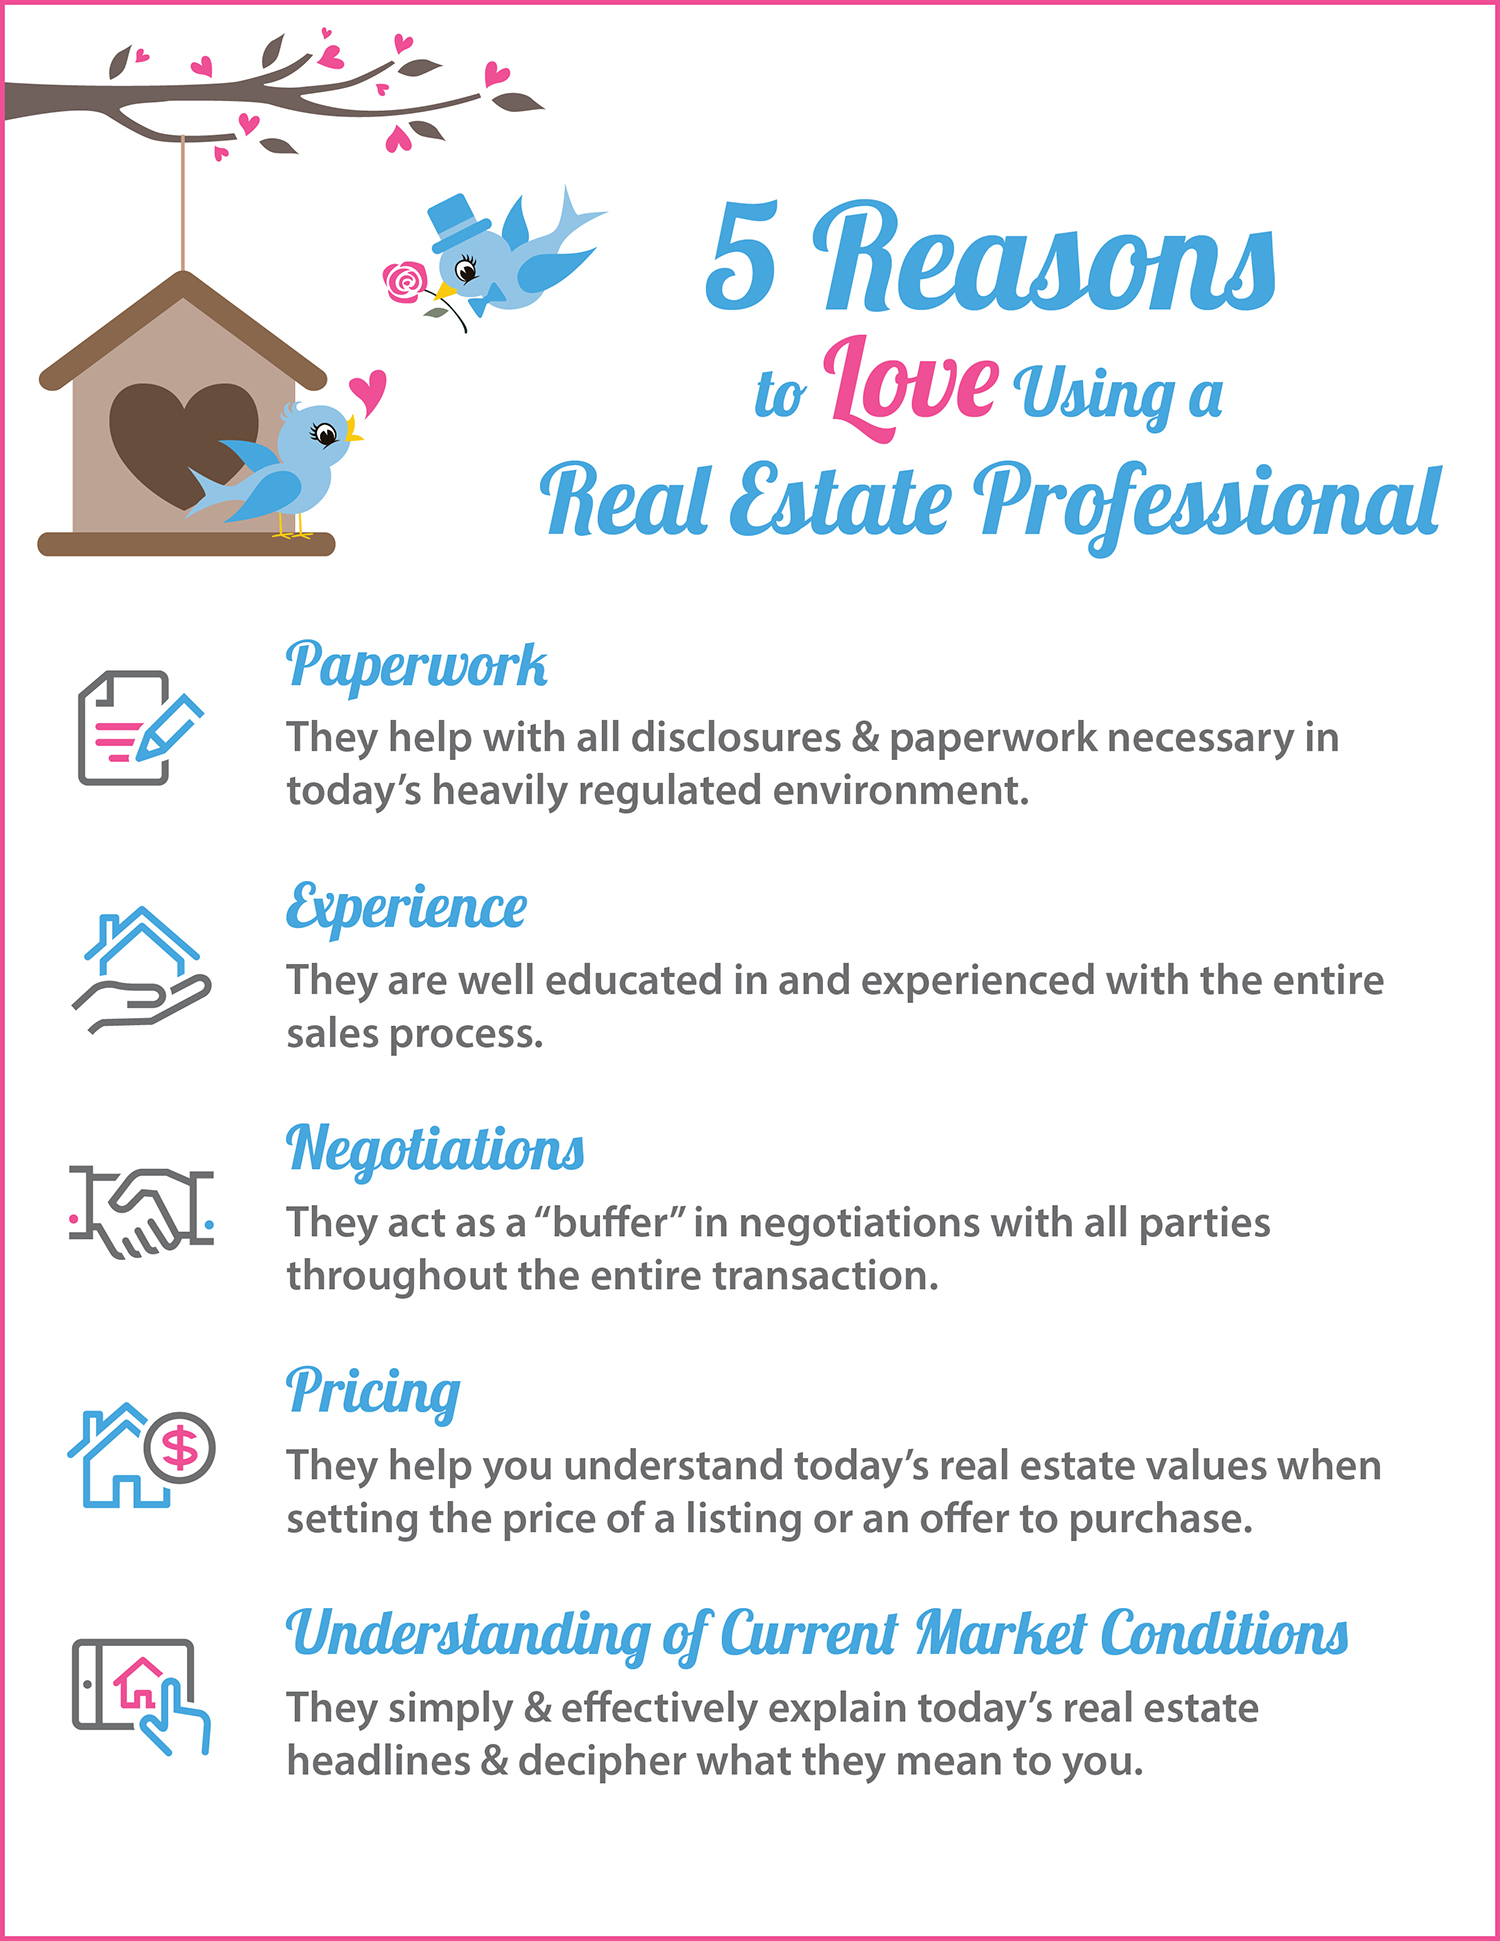 5 Reasons to Love Using a Real Estate Professional | Keeping Current Matters